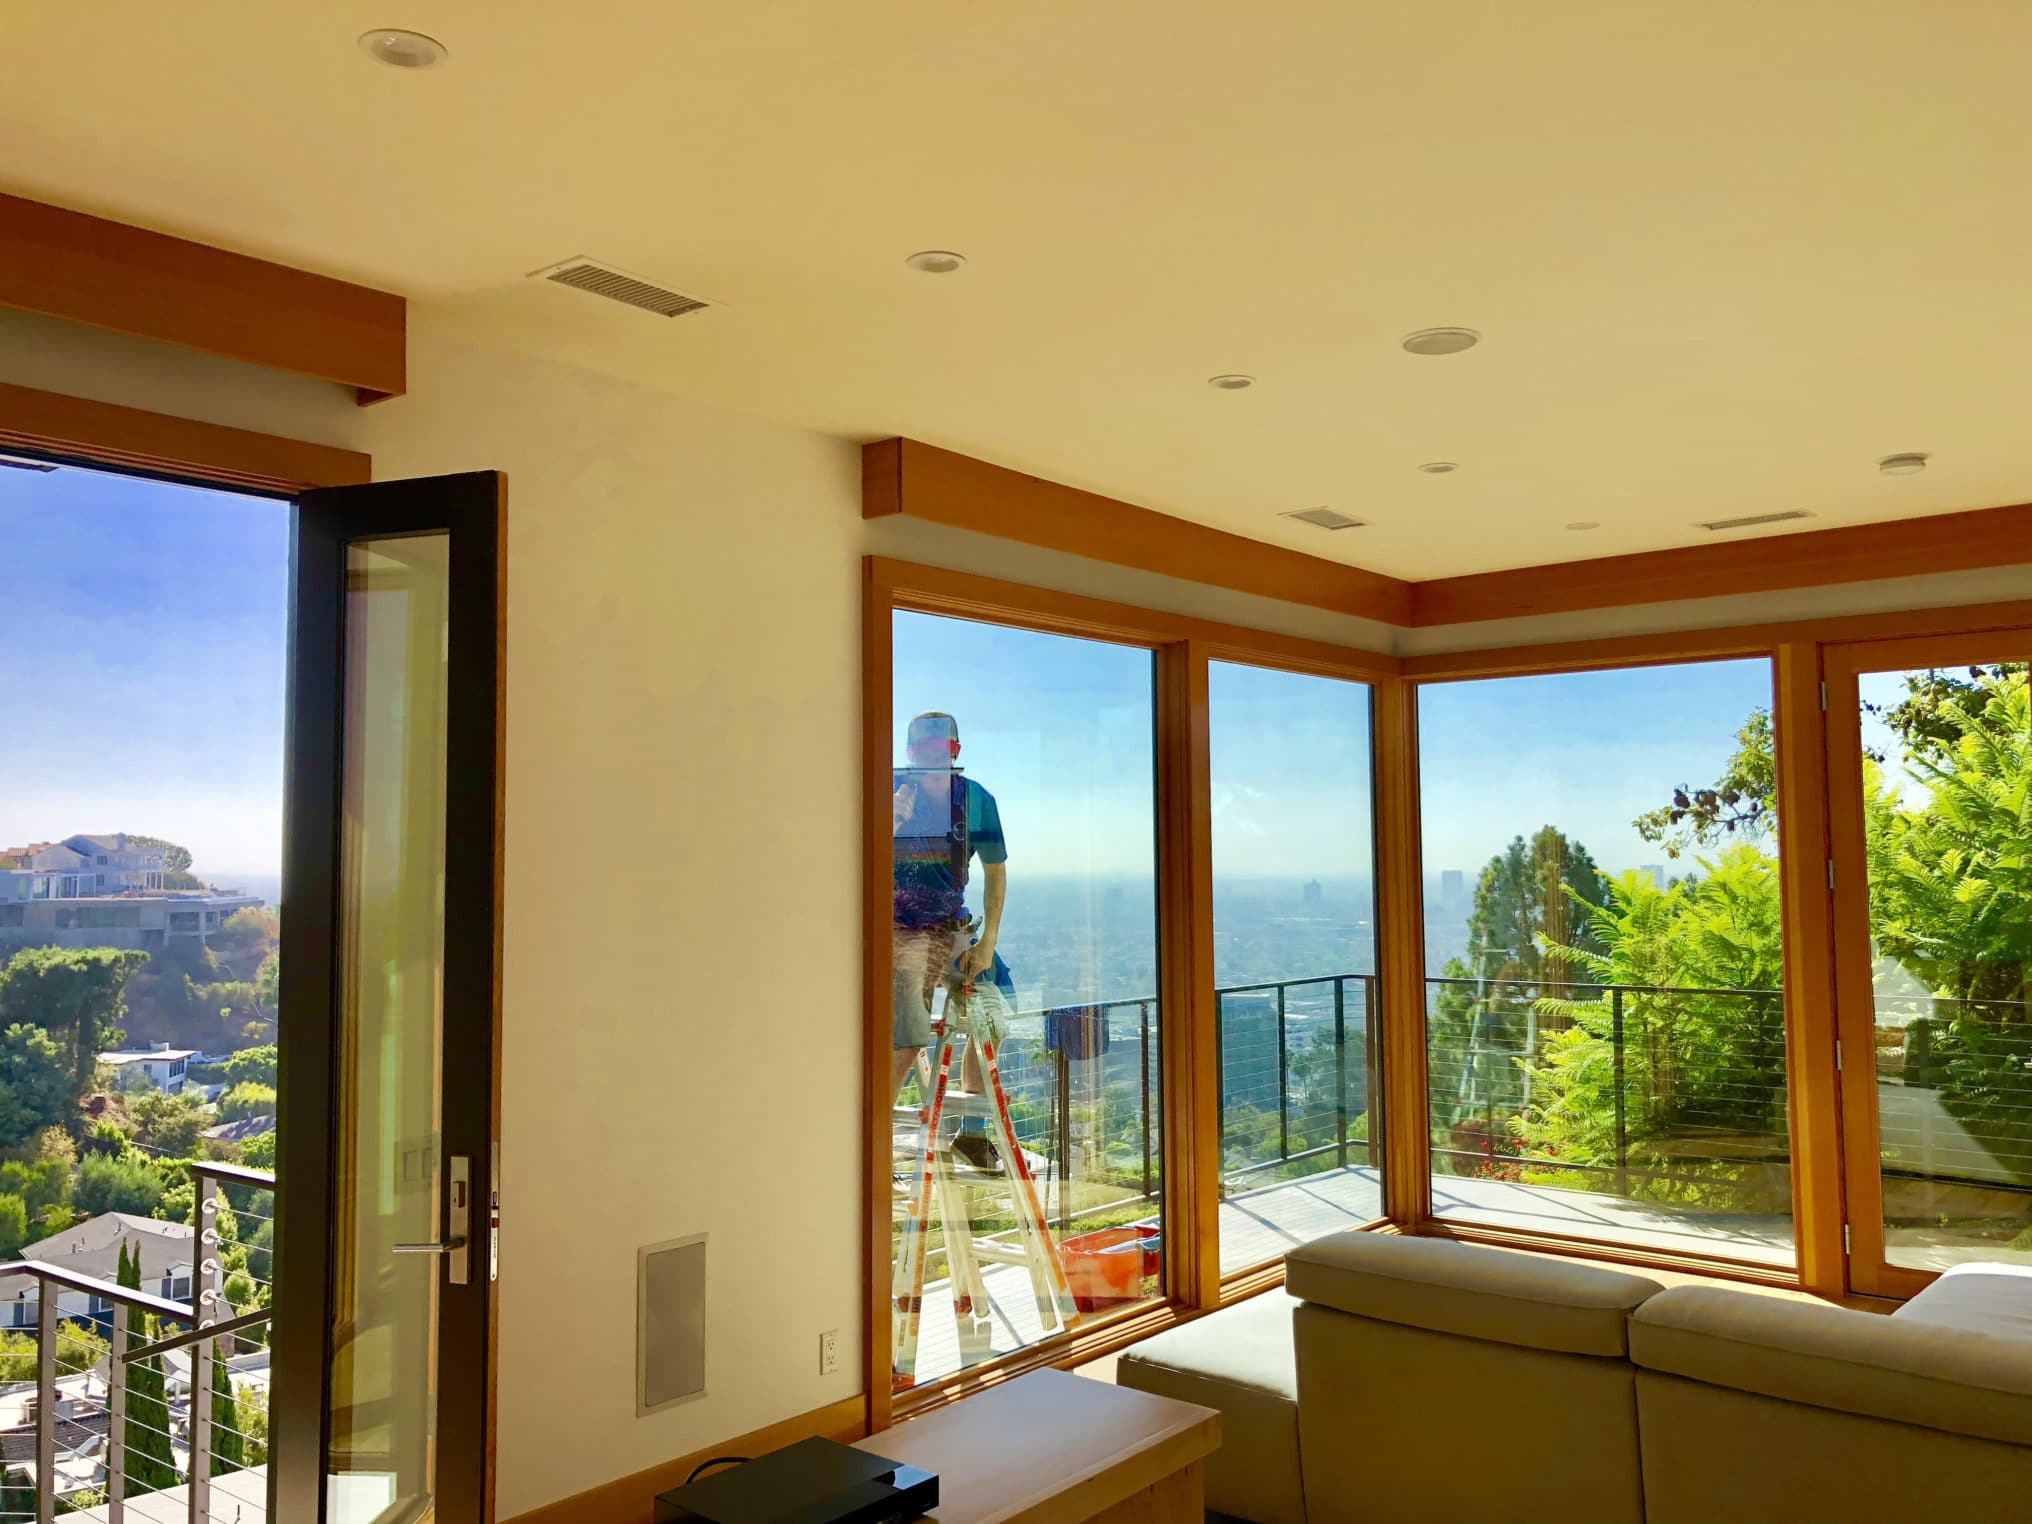 Los Angeles Residential Window Cleaning Tips: Hard Water Stains